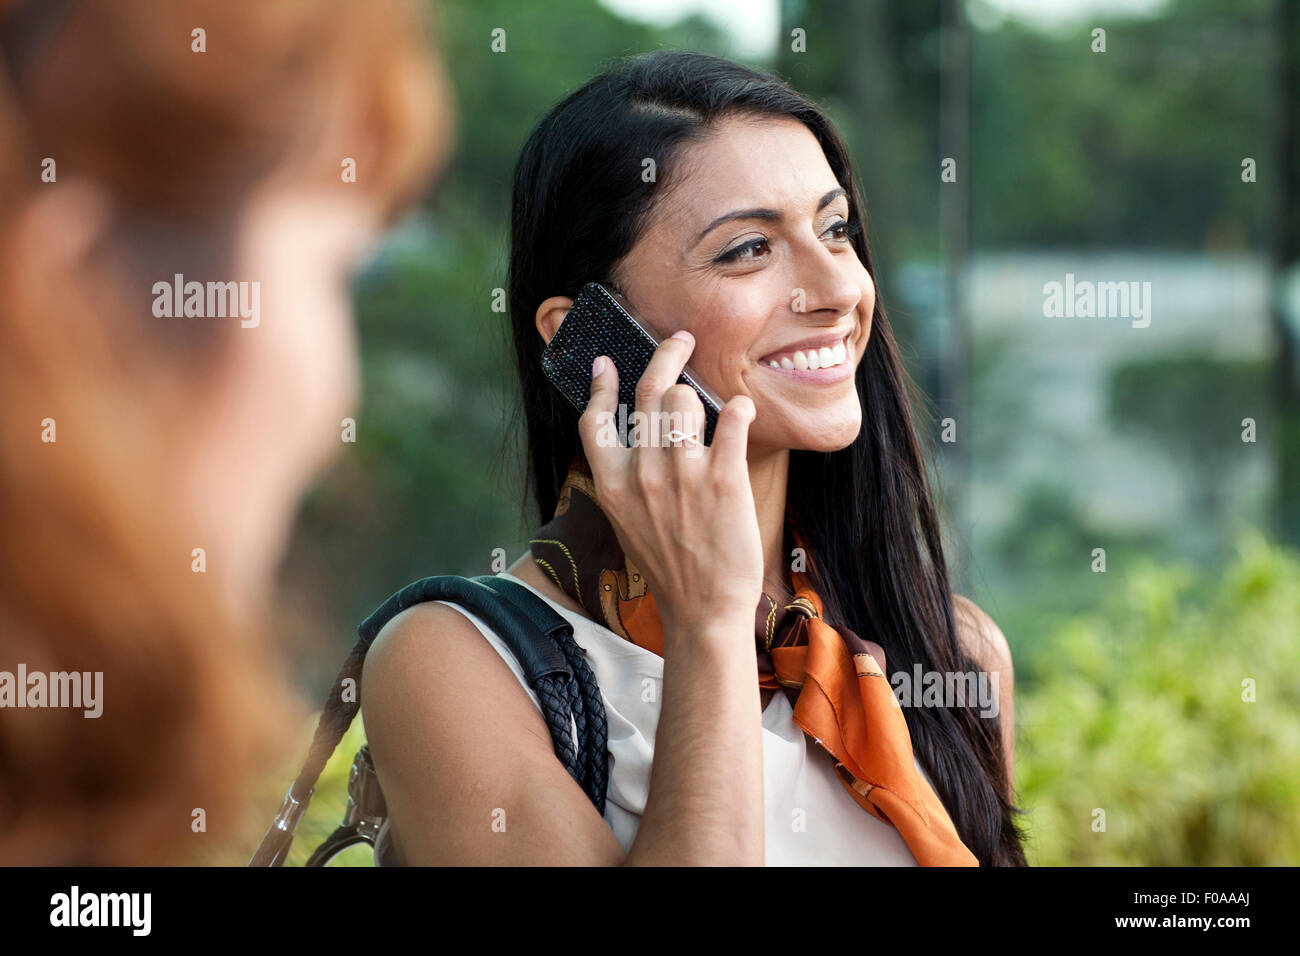 Mid adult woman using smartphone, smiling Banque D'Images